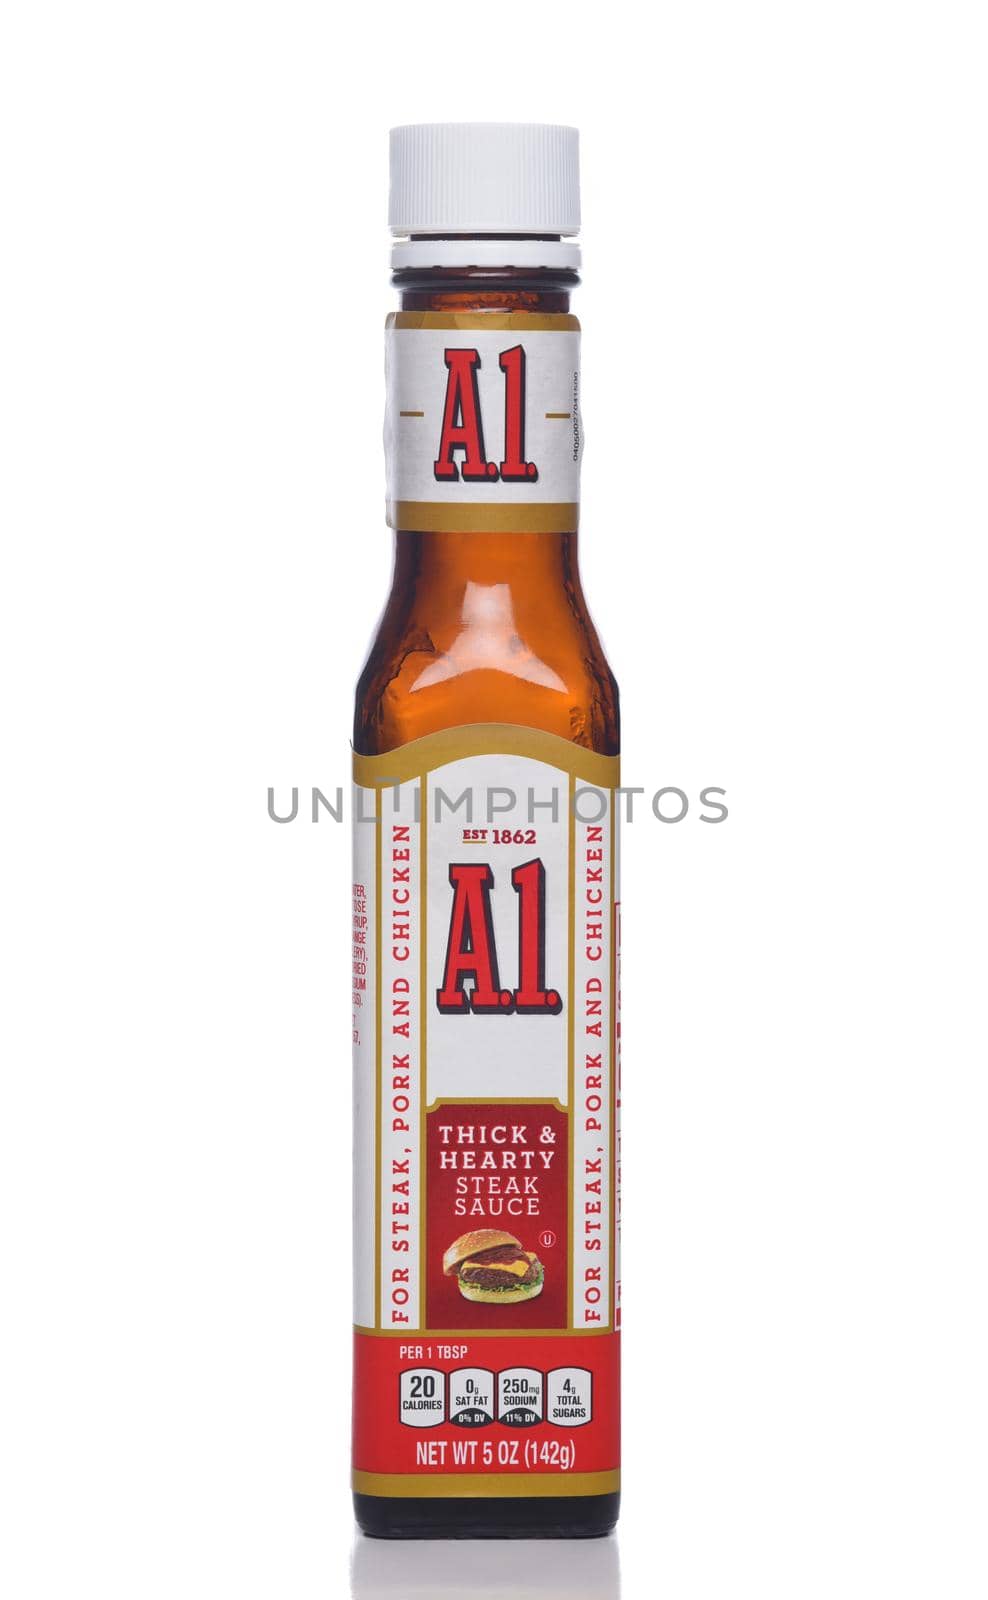 IRVINE, CALIFORNIA - 12 NOV 2020: A bottle of A1 Thick and Hearty Steak Sauce.  by sCukrov